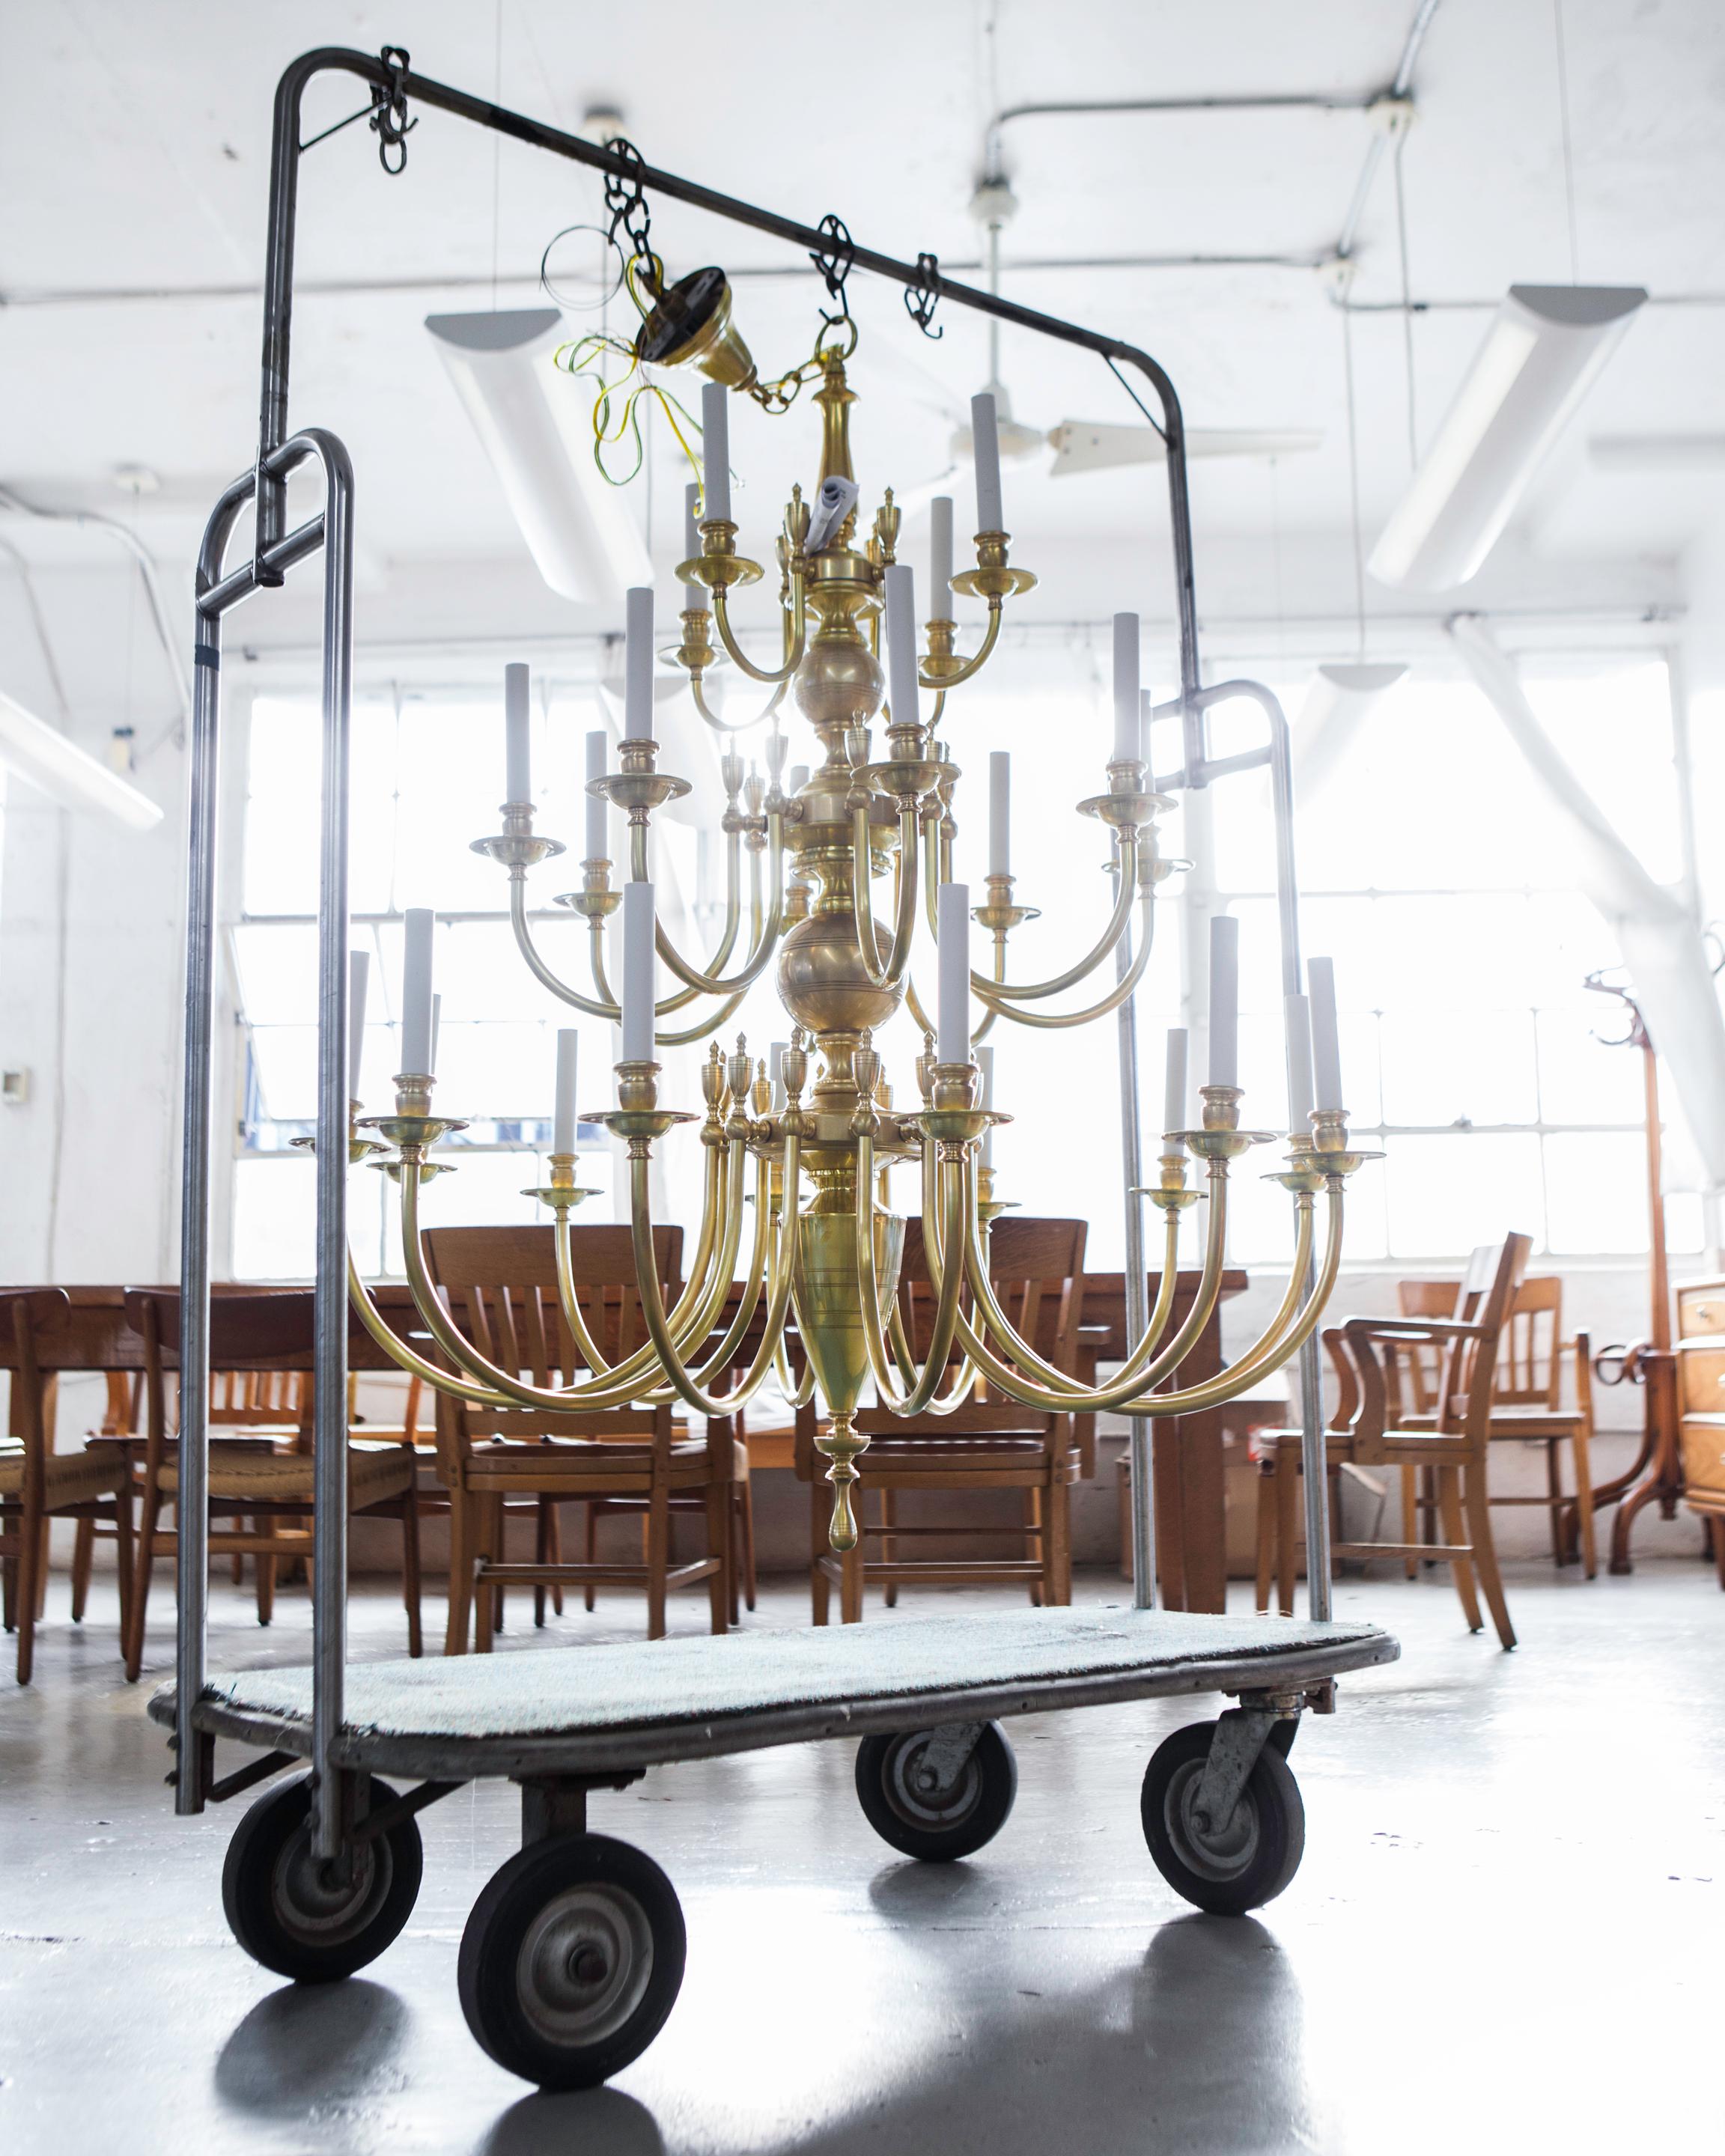 American Three-Tier Solid Brass Astrid 24 Chandelier by Remains Lighting, Burnished Brass